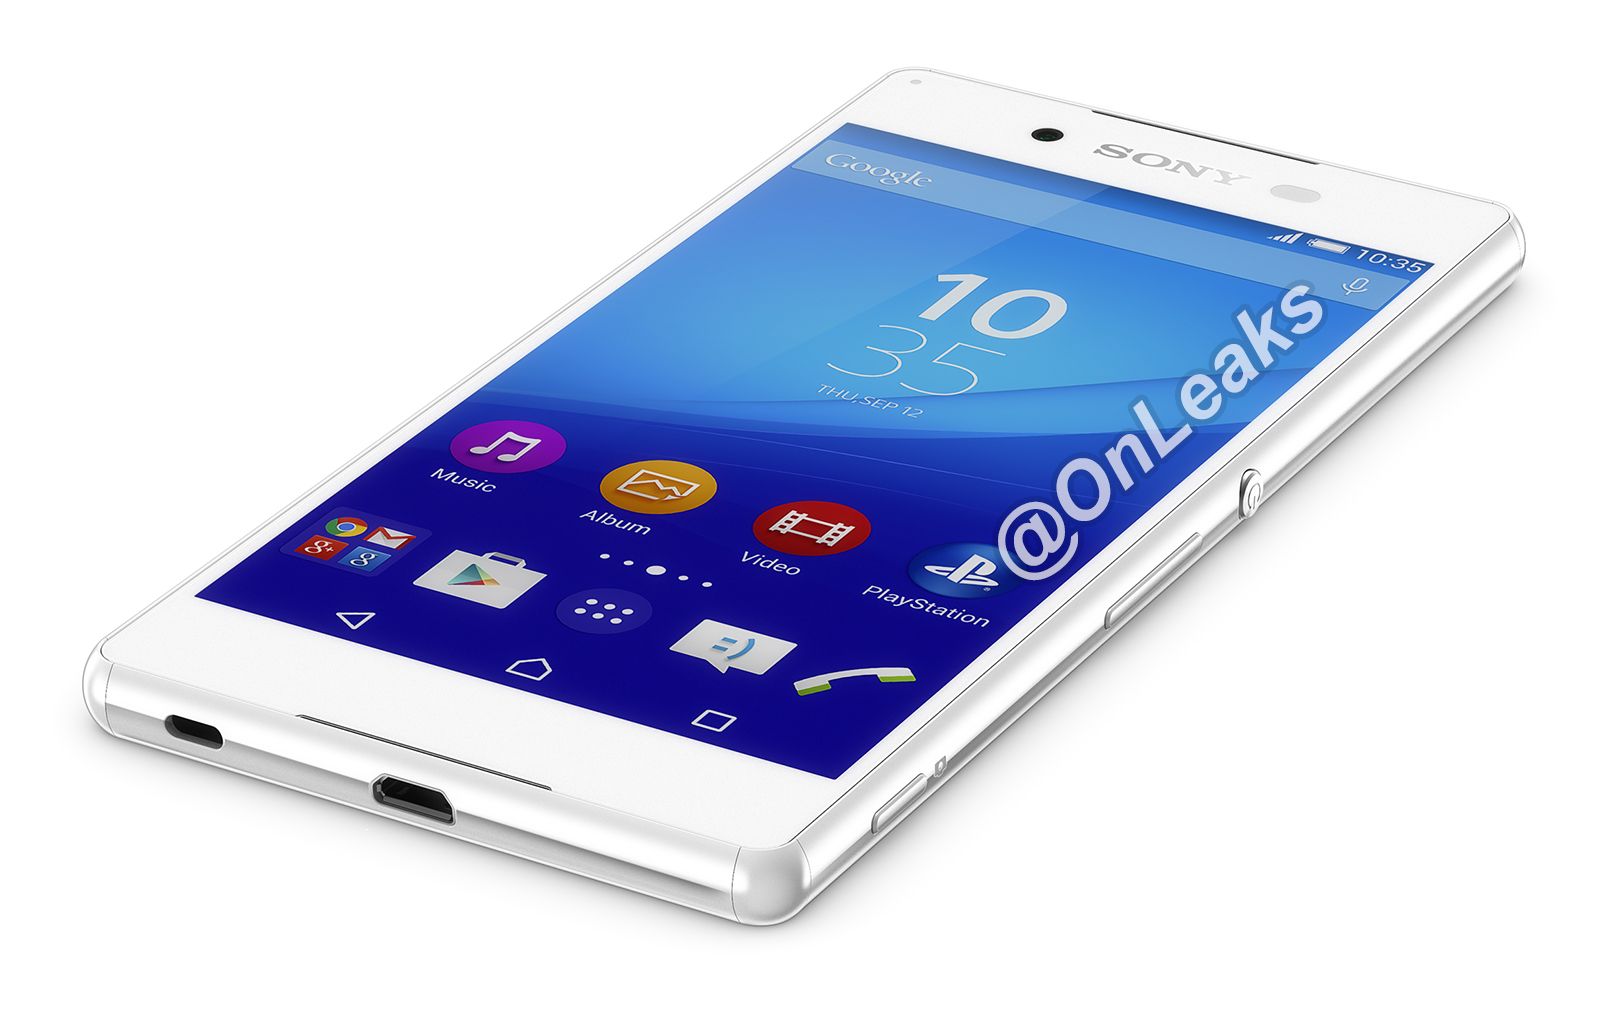 sony xperia z4 release date rumours and everything you need to know image 1